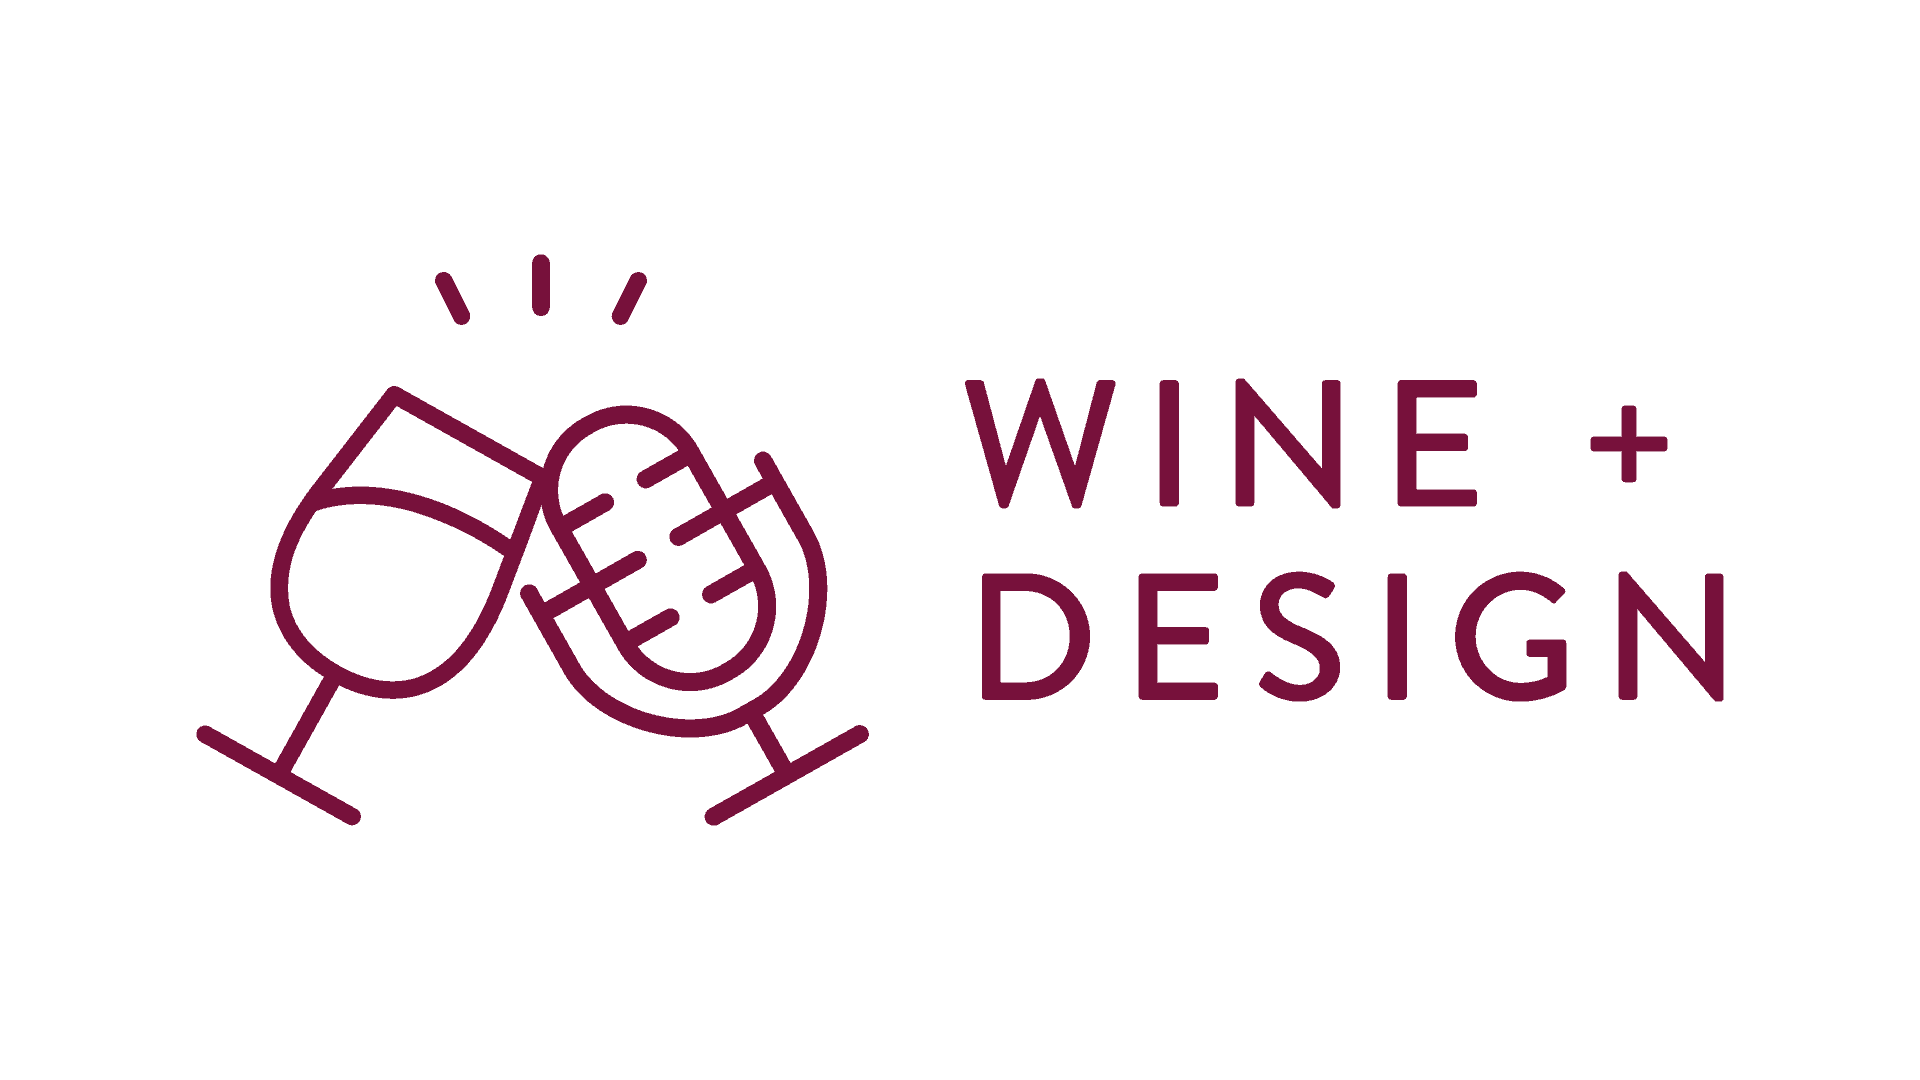 Icons of a wine glass and a microphone next to text 'Wine + Design'.